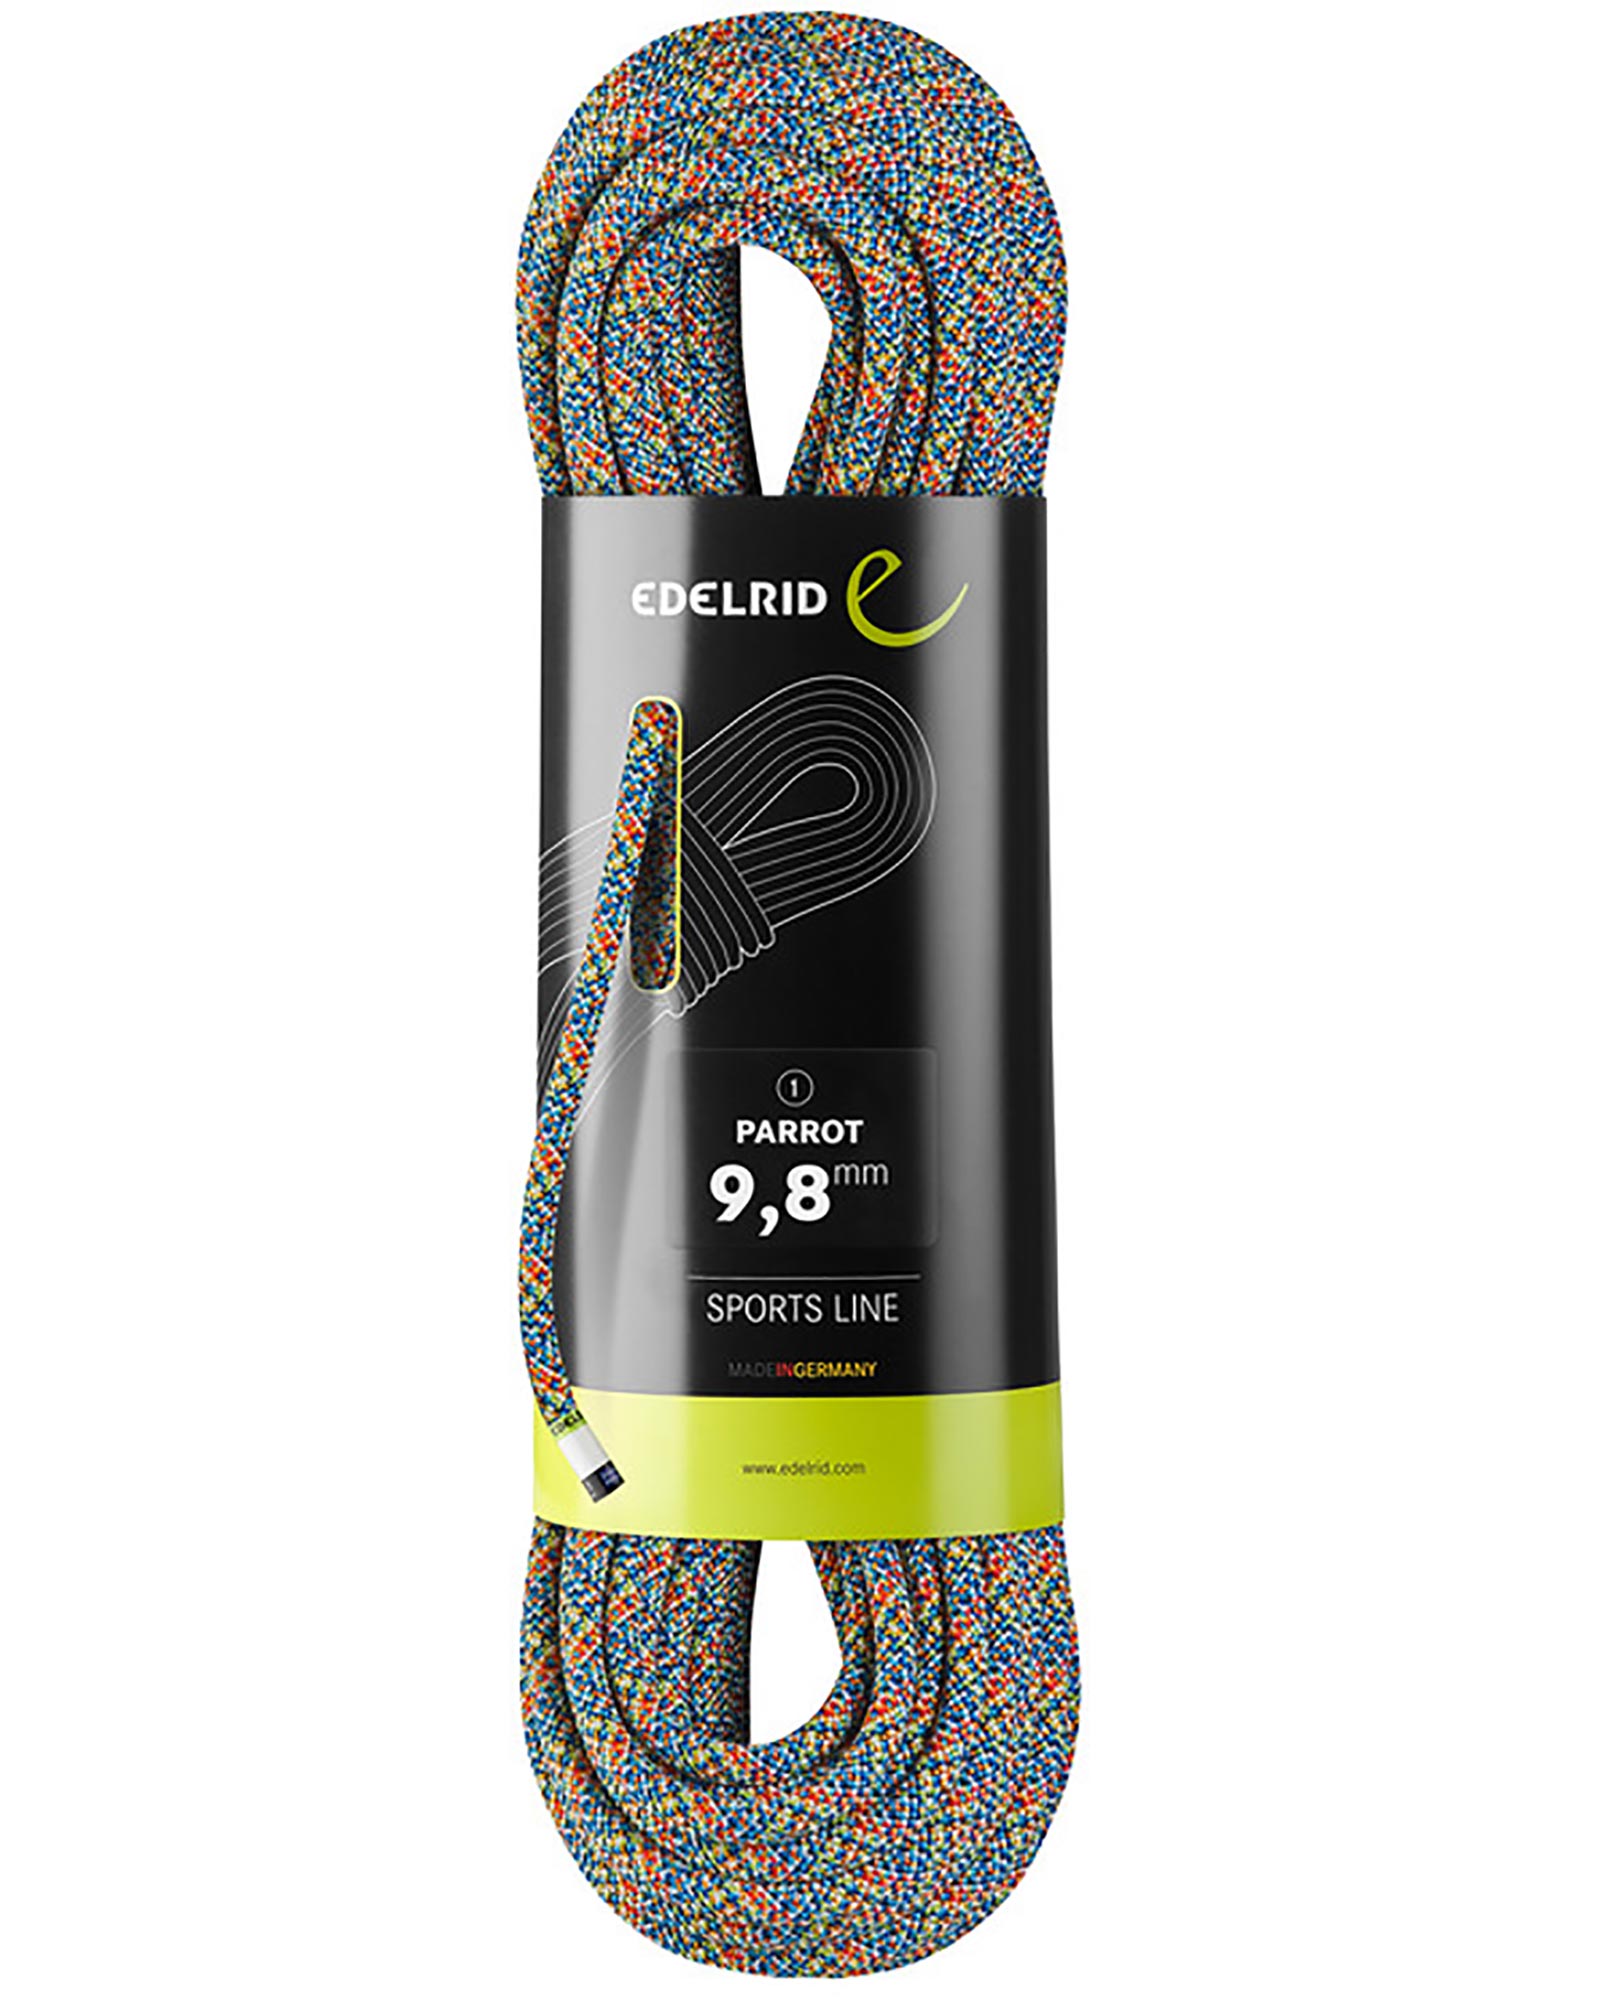 Edelrid Parrot 9.8mm x 60m Rope 0